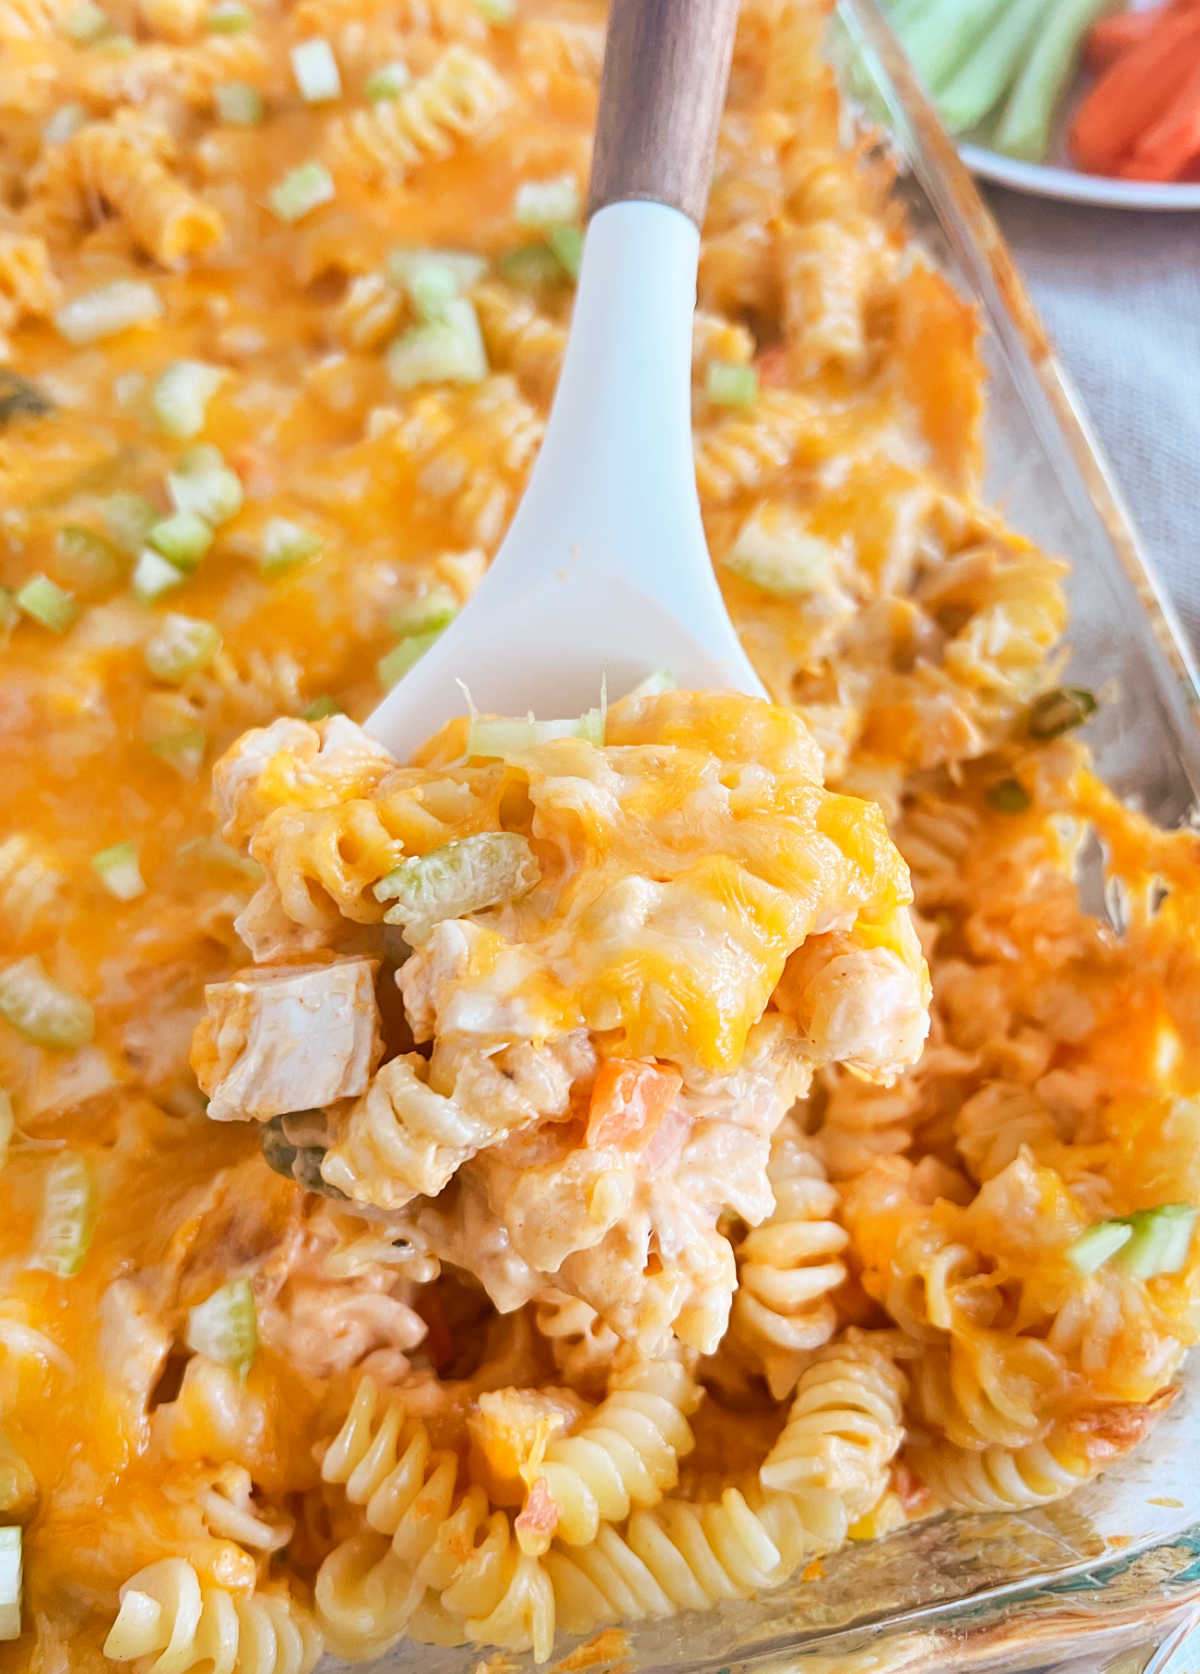 buffalo chicken casserole with pasta and veggies in a creamy cheese sauce on spoon.